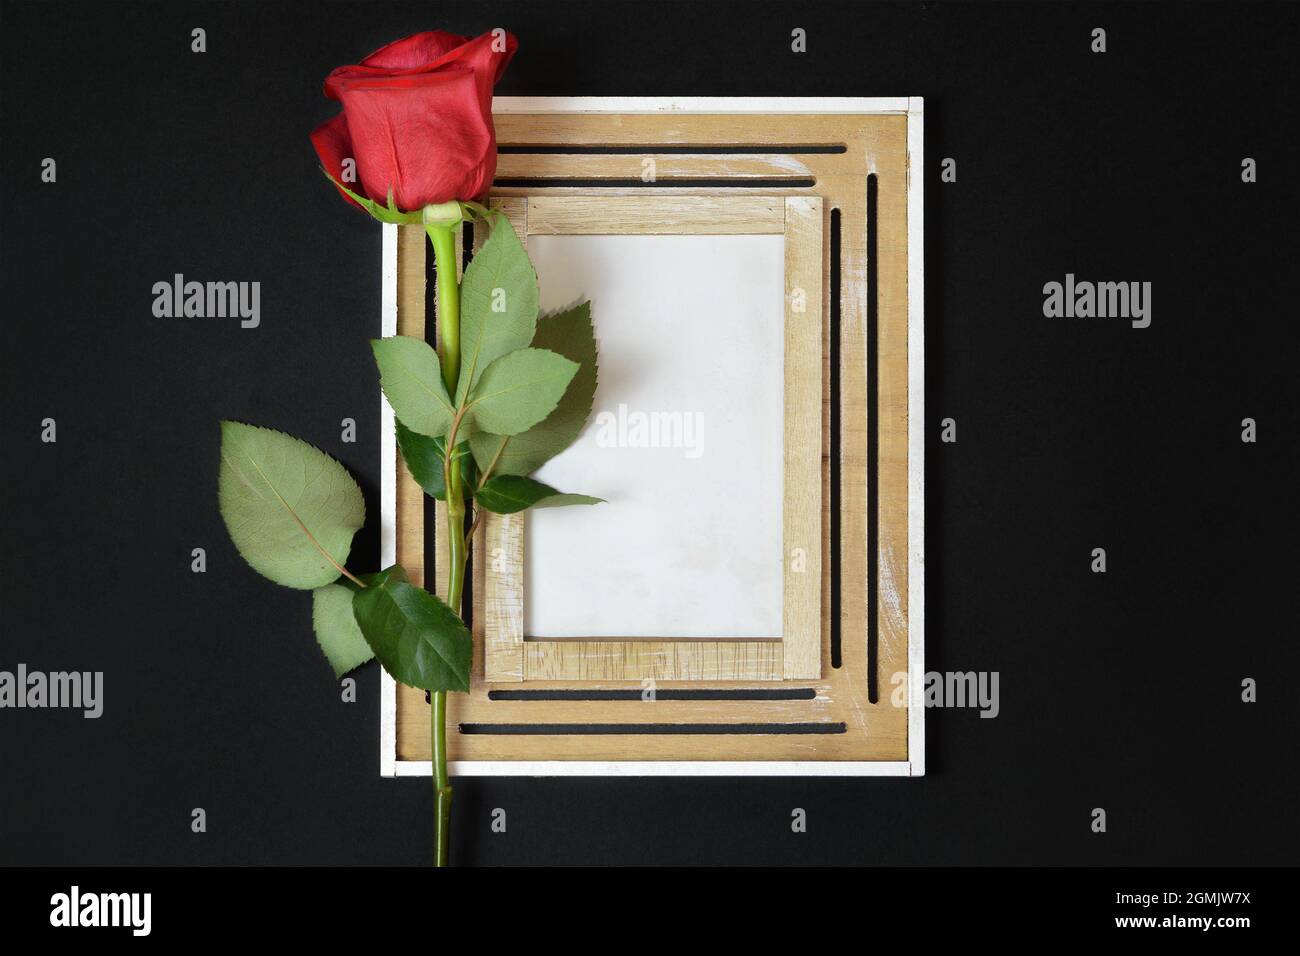 Condolence card with mock-up frame and red rose on black background Stock Photo